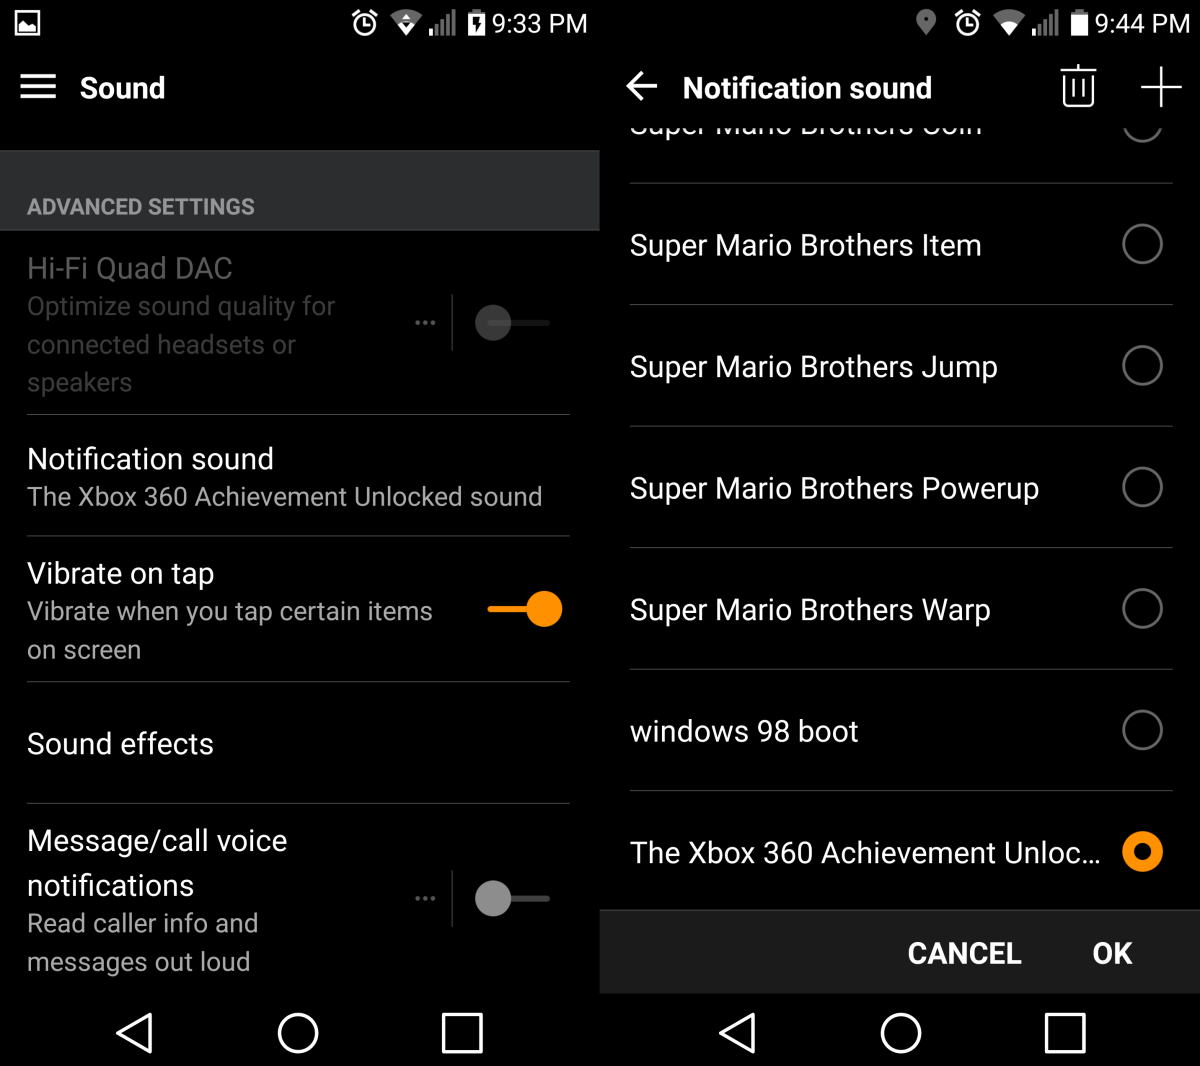 The sounds options screen and the notifications sounds screen.